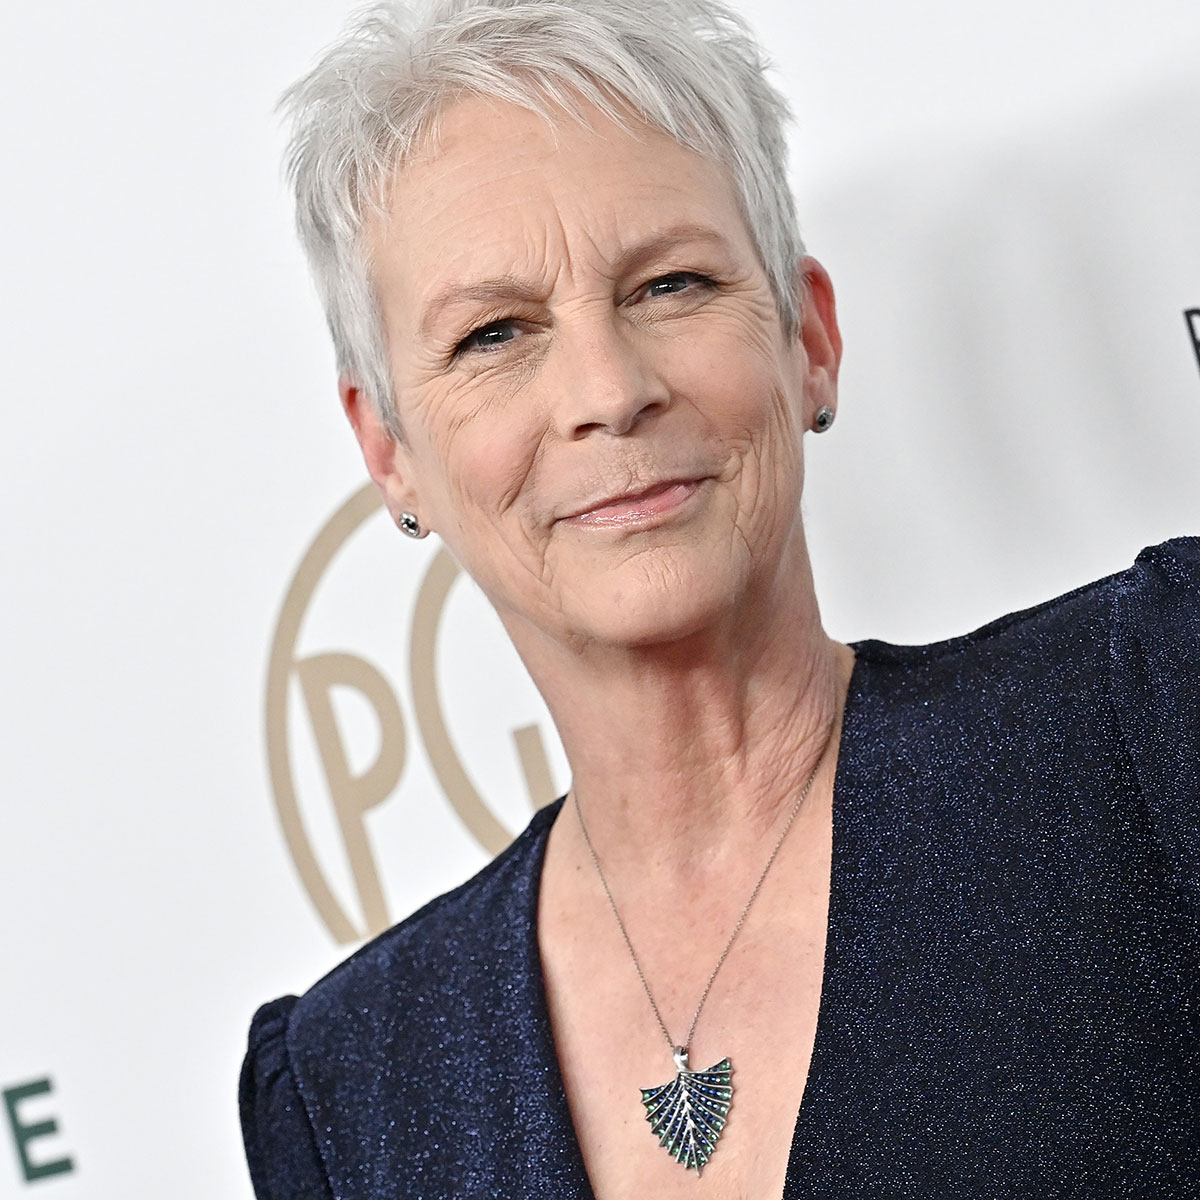 Jamie Lee Curtis Apologizes for “Stupid” Comment Shading Marvel